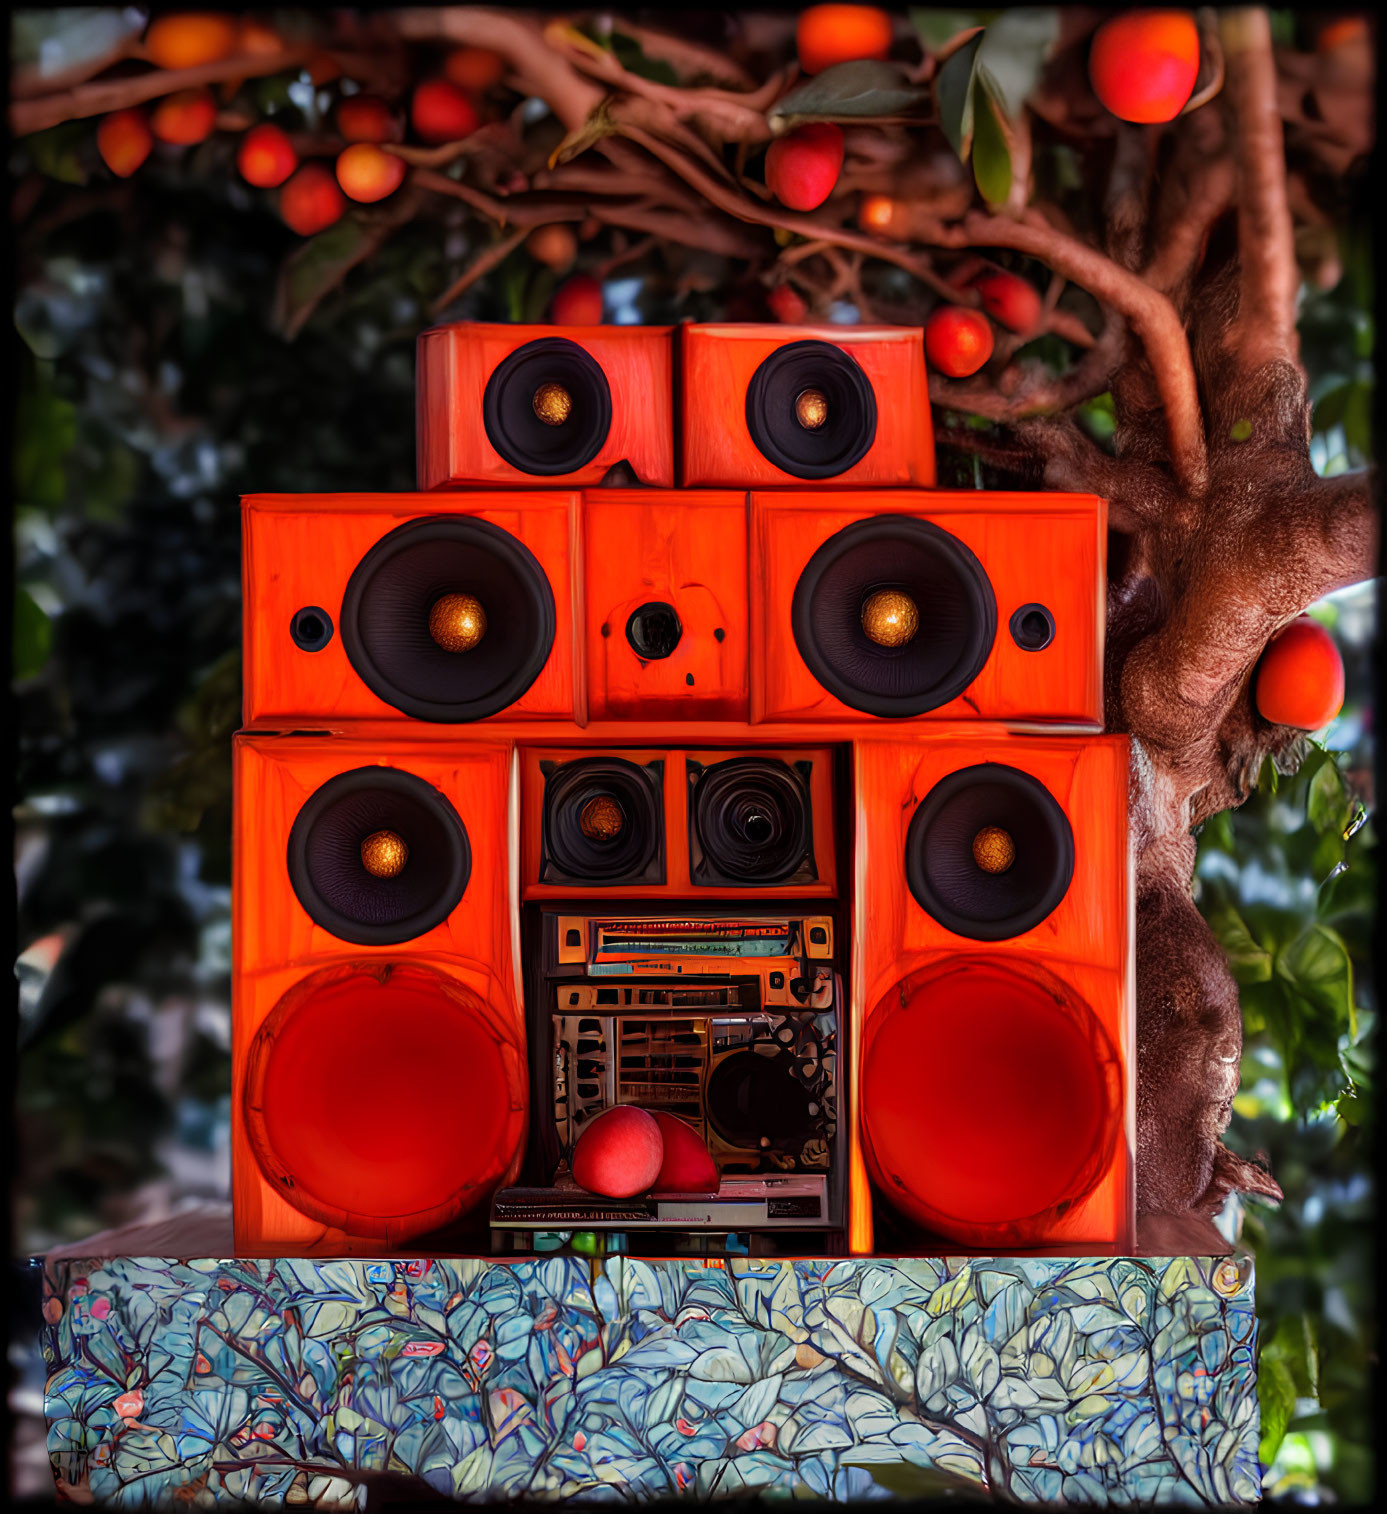 Vibrant orange speakers and audio receiver with ripe oranges and patterned surface